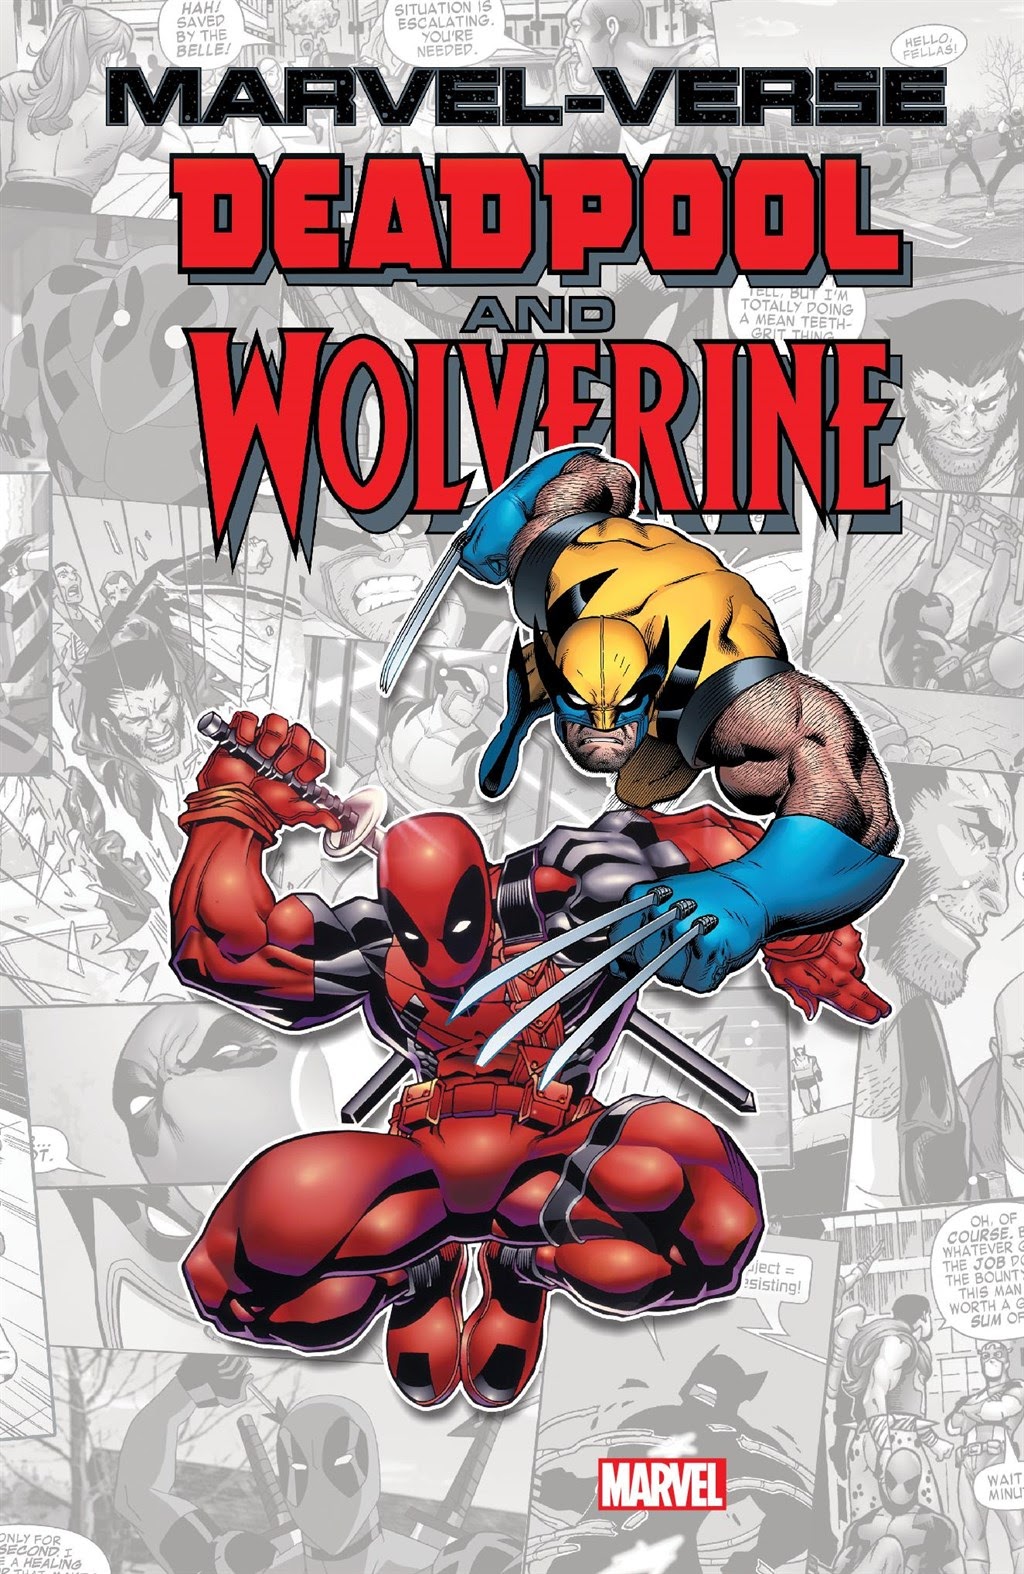 Read online Marvel-Verse (2020) comic -  Issue # Deadpool and Wolverine - 1